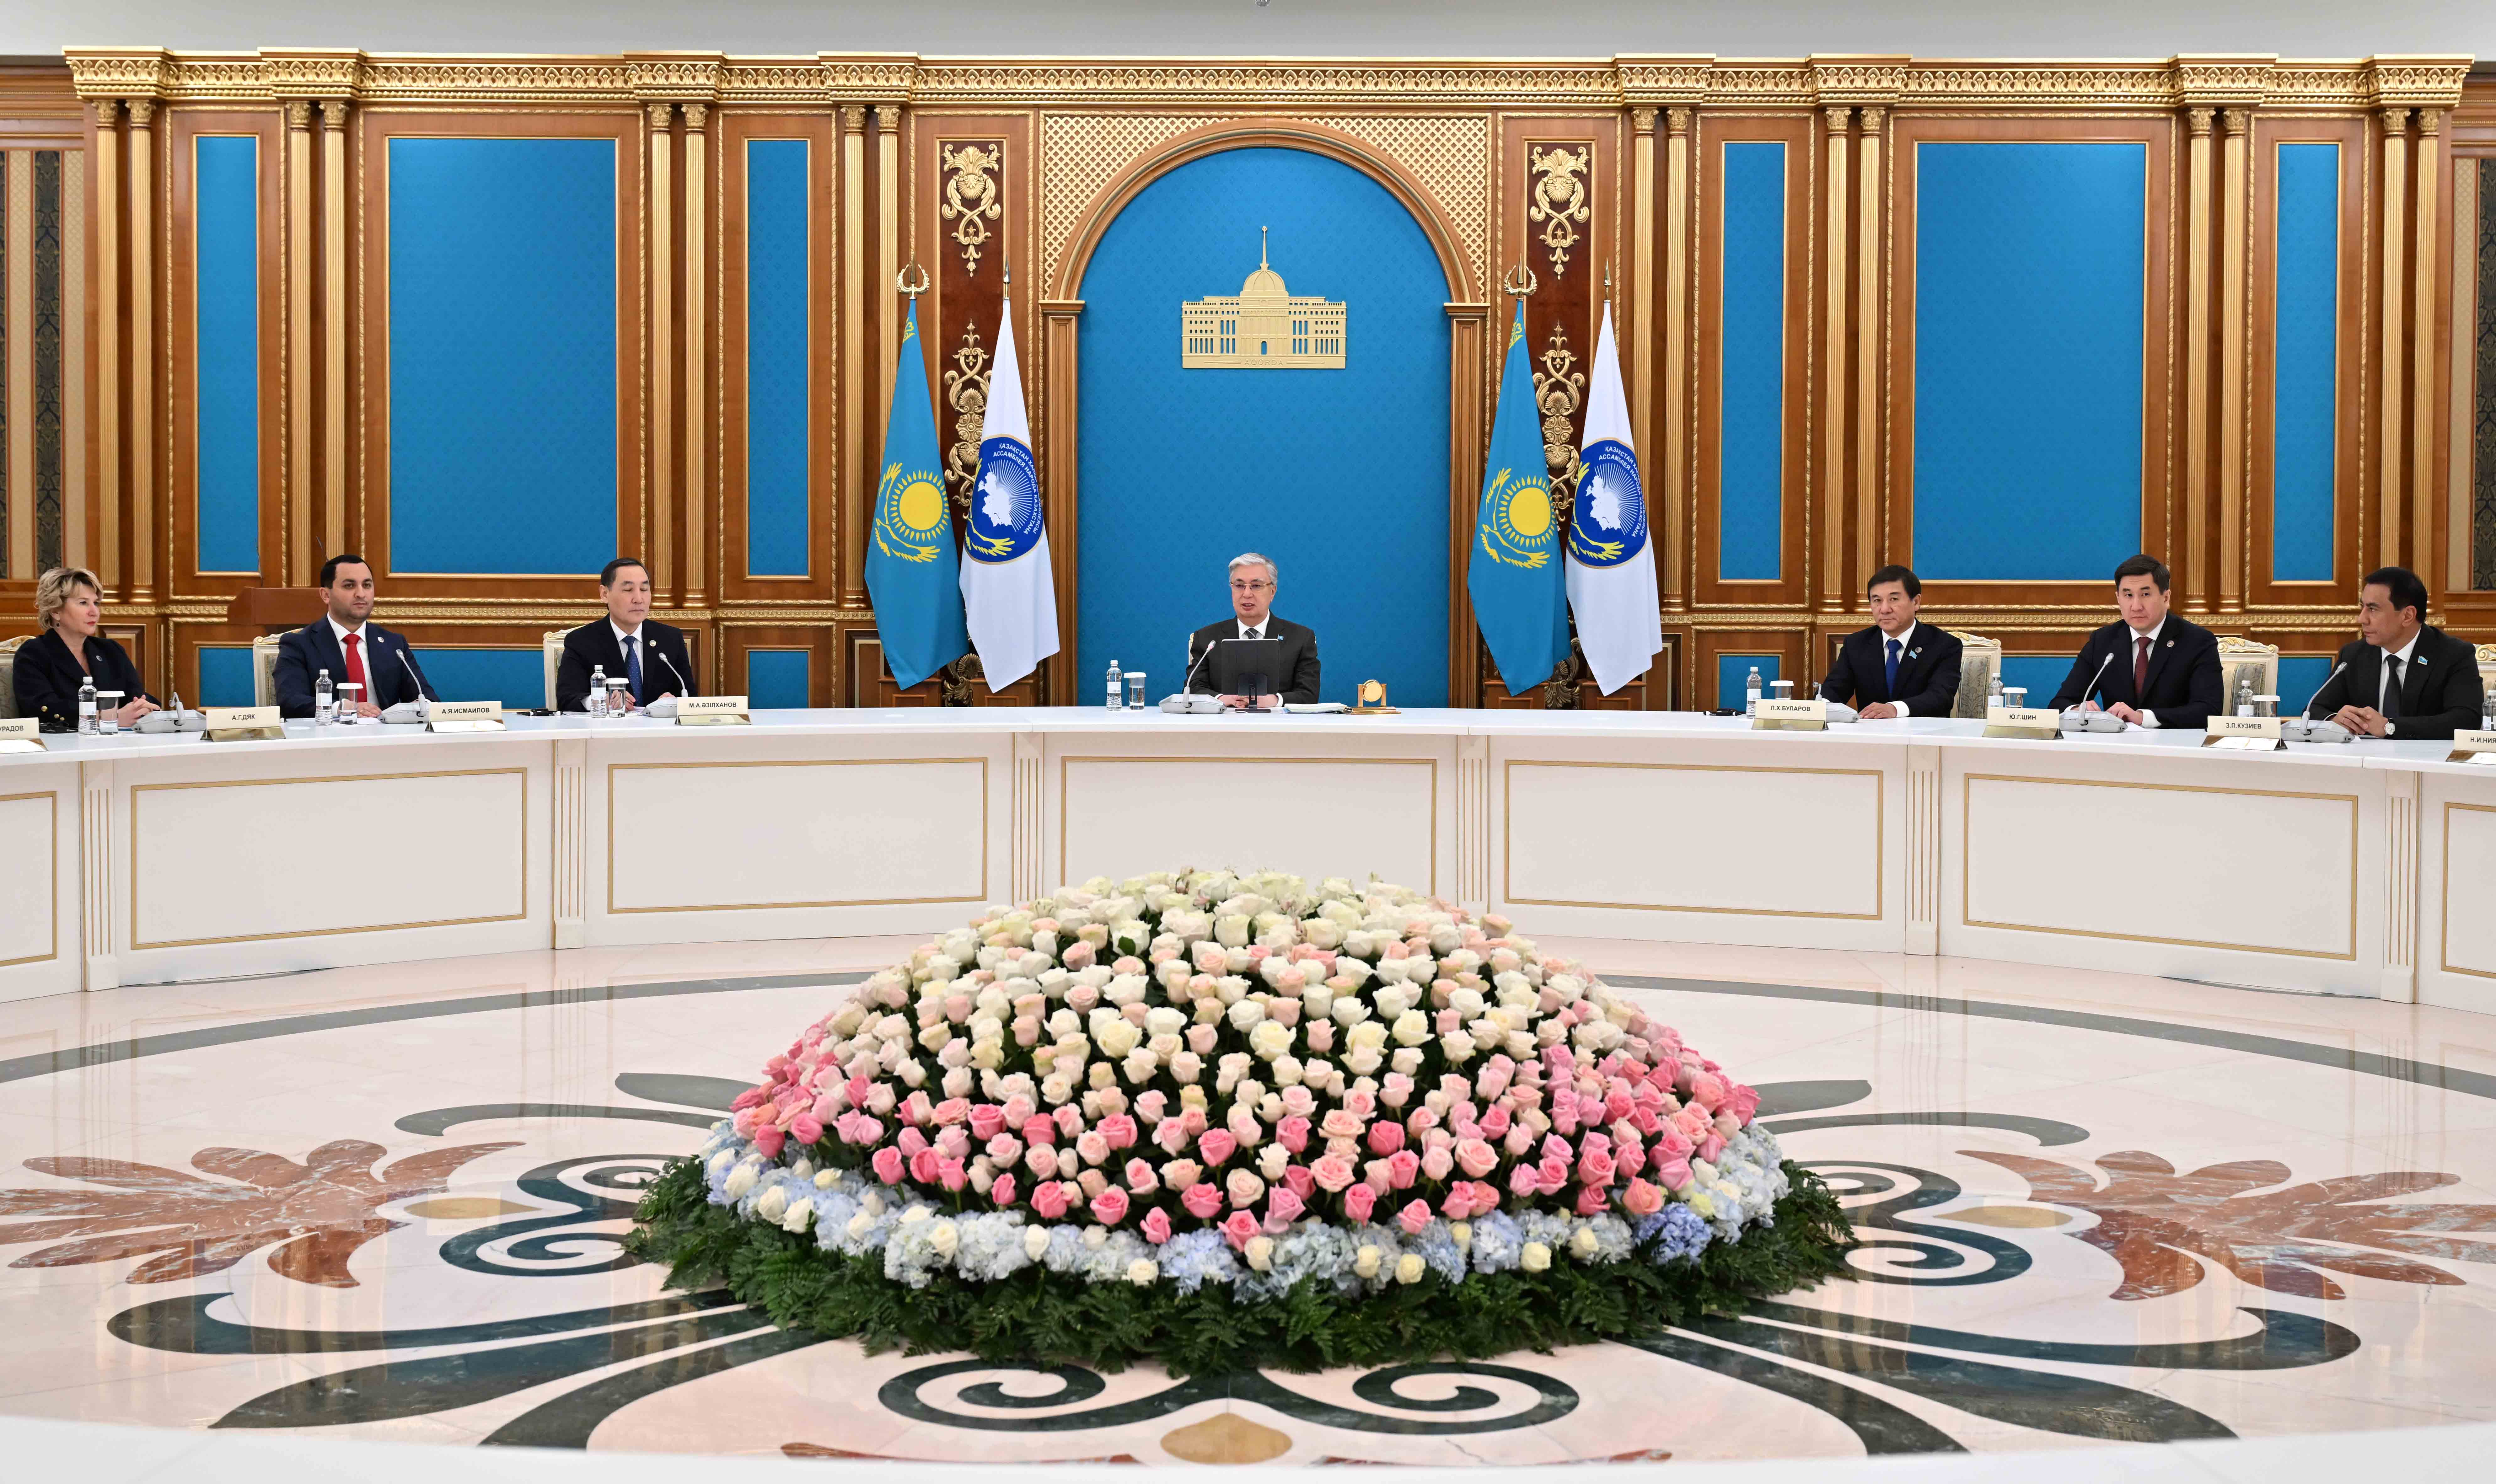 The Head of State held the XXXІІІ session of the Assembly of the People of Kazakhstan “Unity. Creation. Progress”